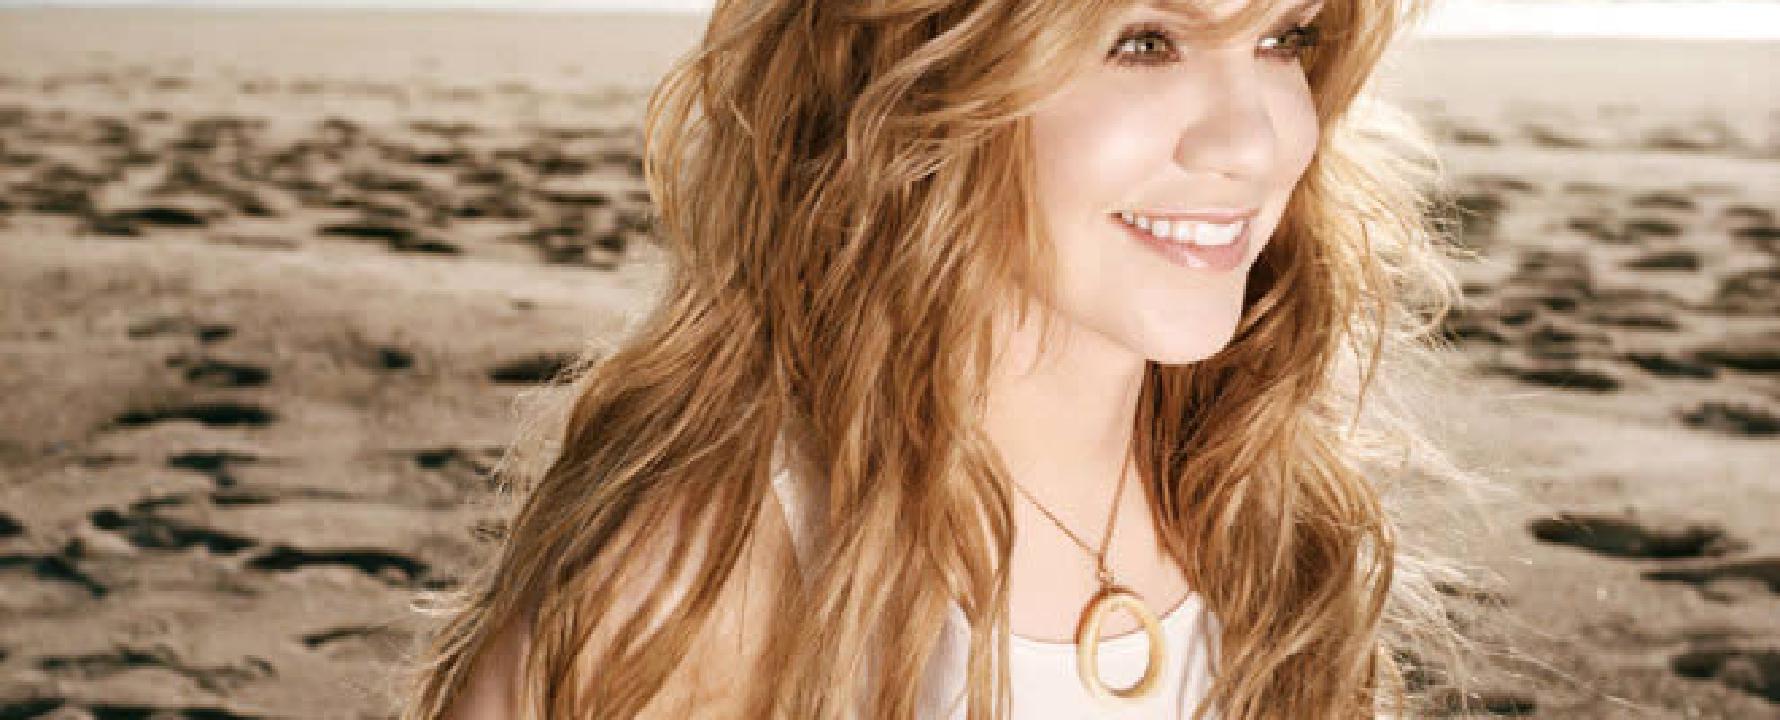 Promotional photograph of Alison Krauss.